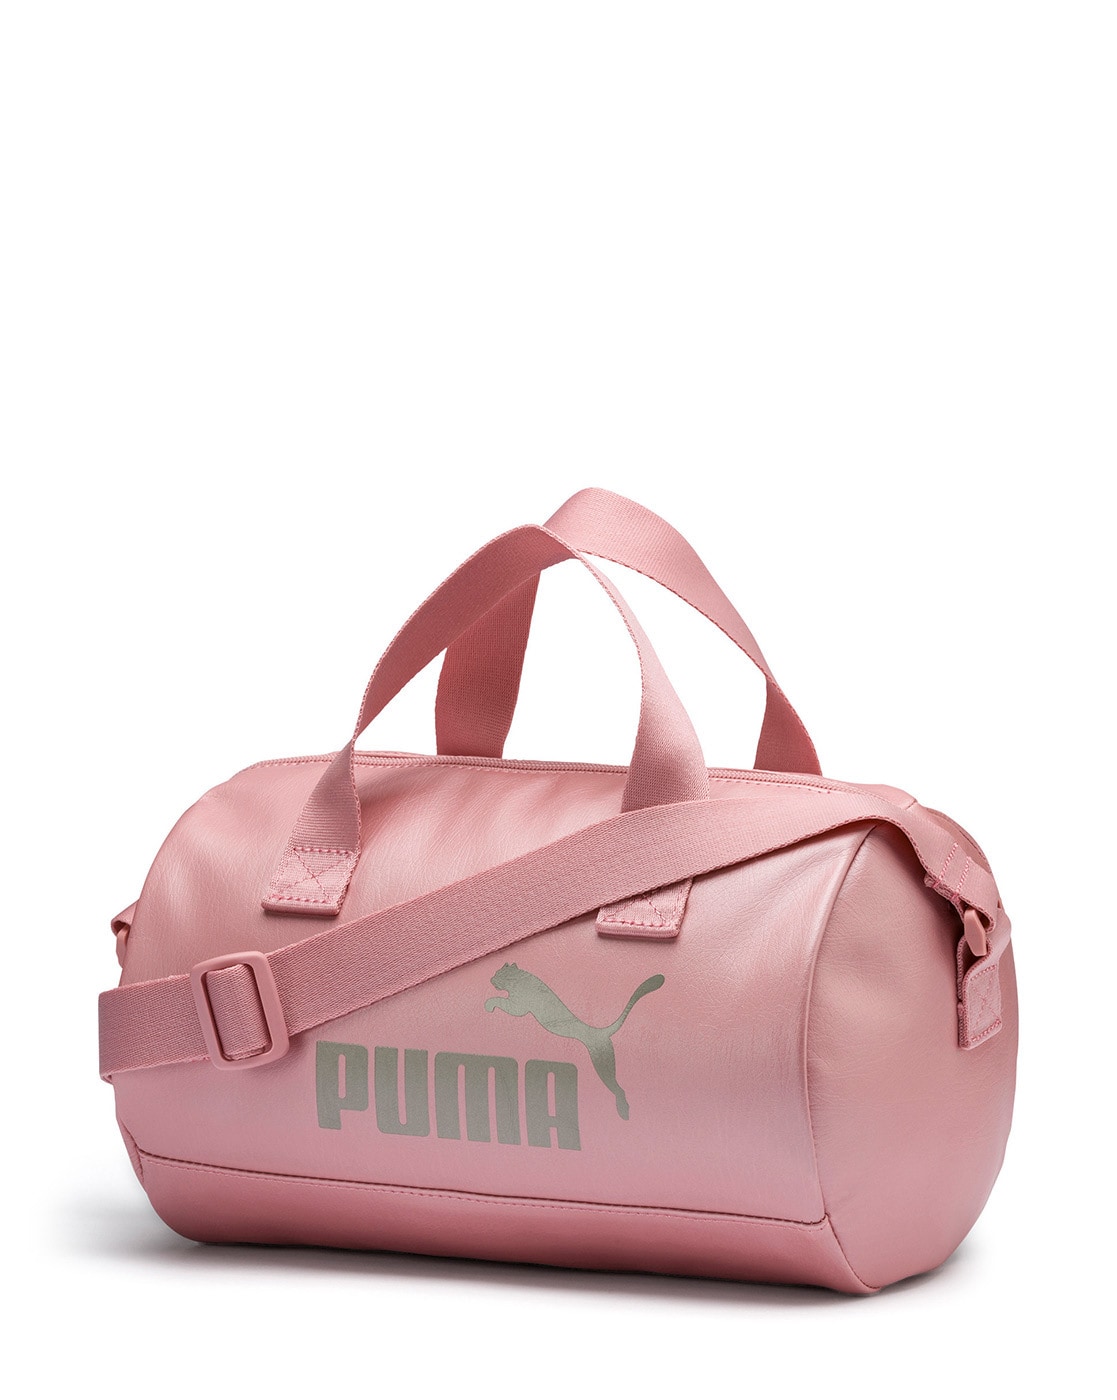 PUMA Phase Sports Bag Duffel Without Wheels Bridal Rose - Price in India |  Flipkart.com